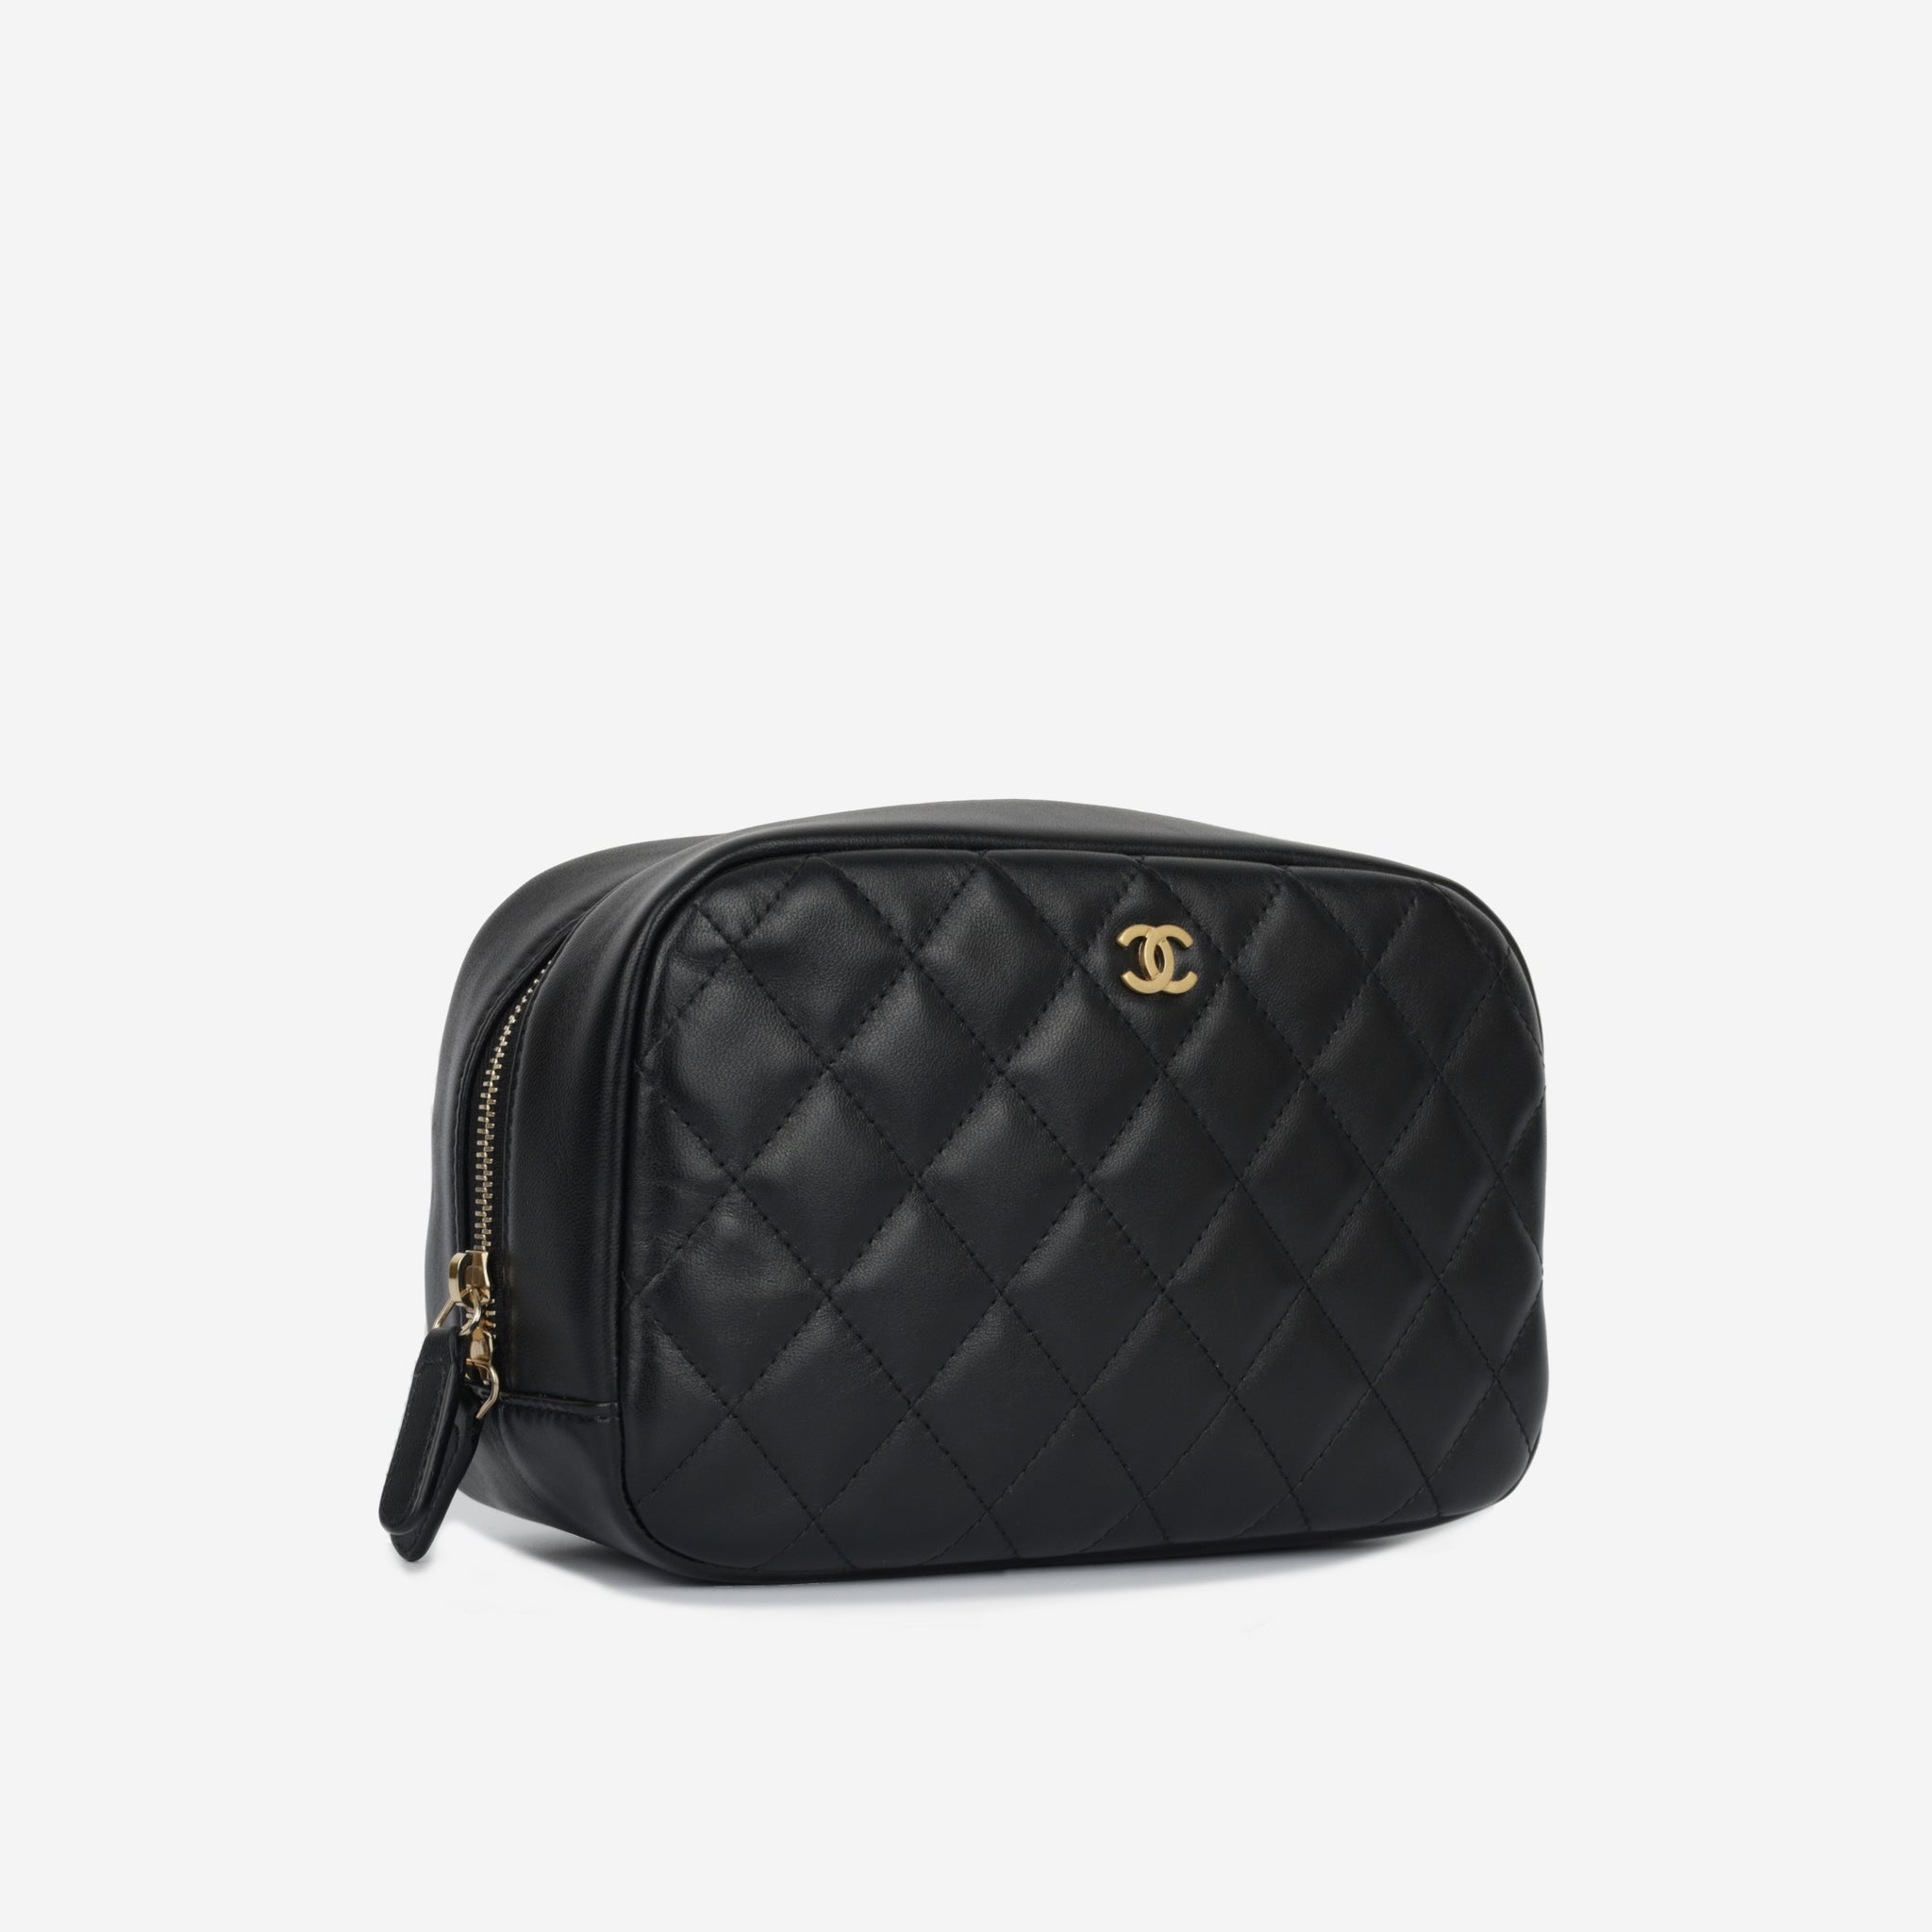 CHANEL Black Caviar Quilted Curvy Pouch Cosmetic Case